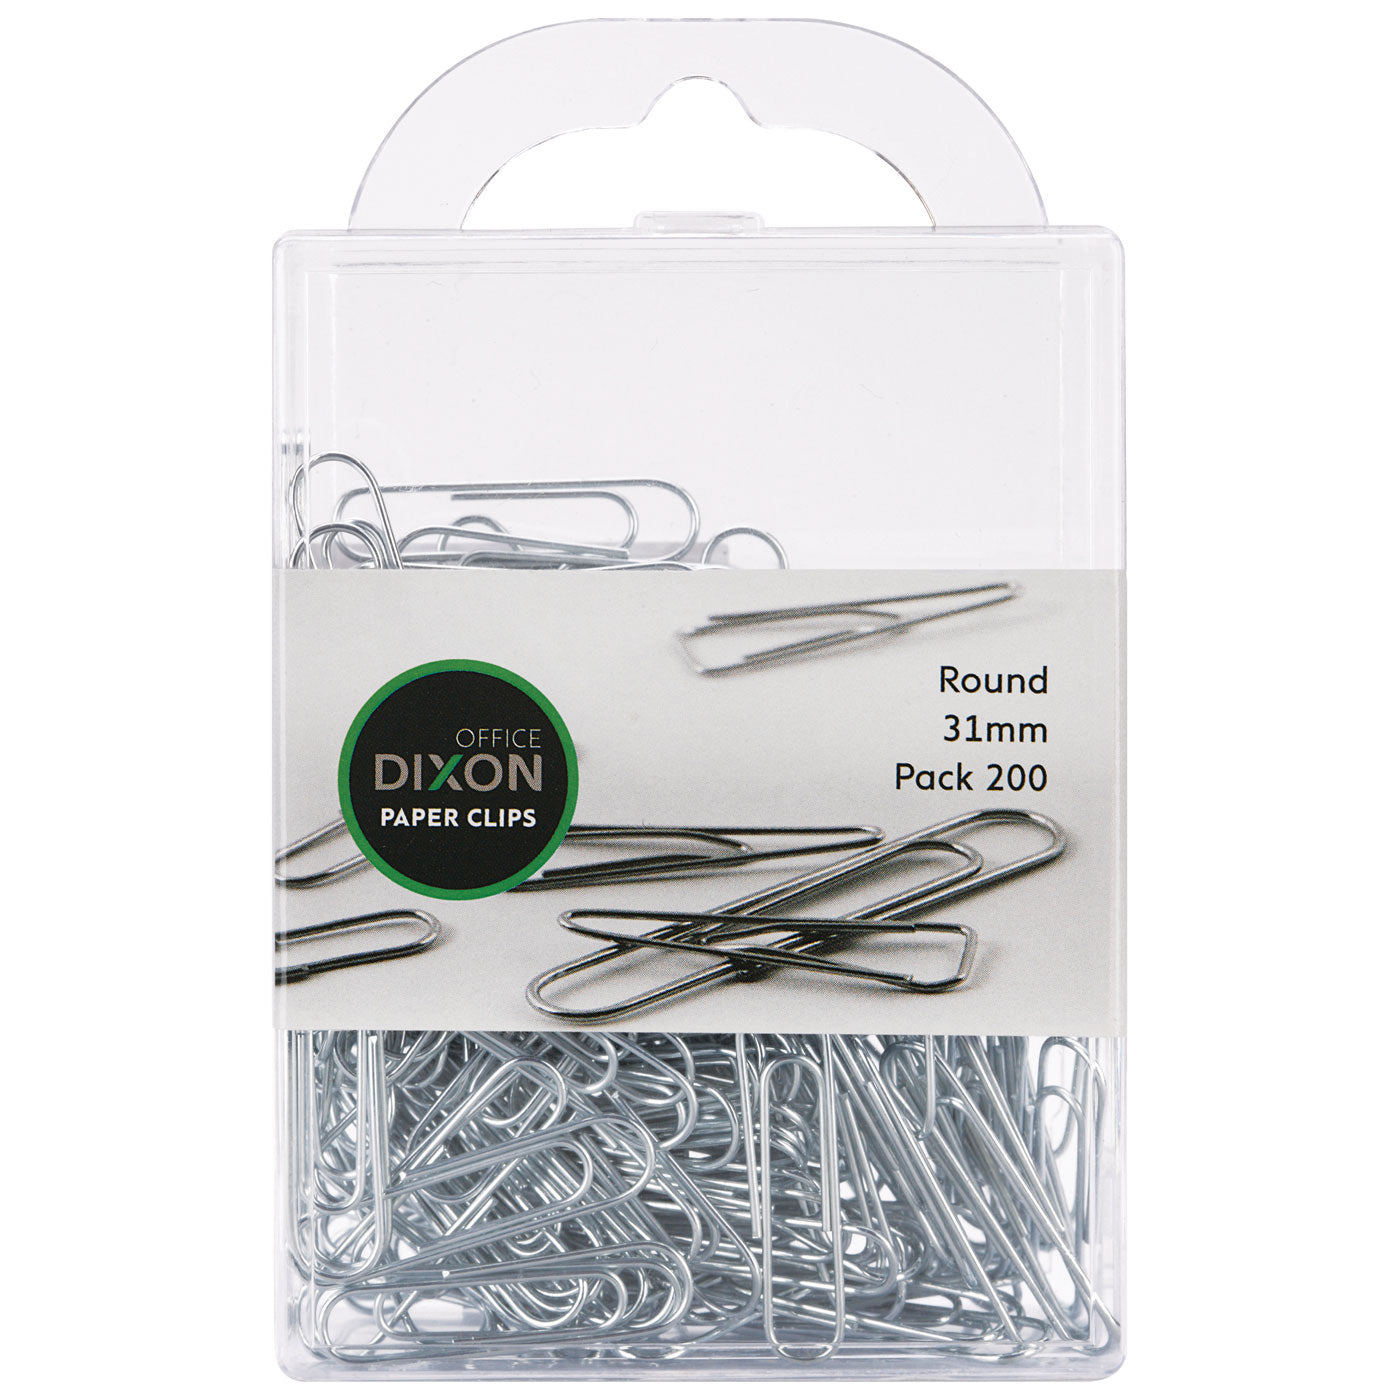 Dixon Paper Clips Round 31mm Pack 200